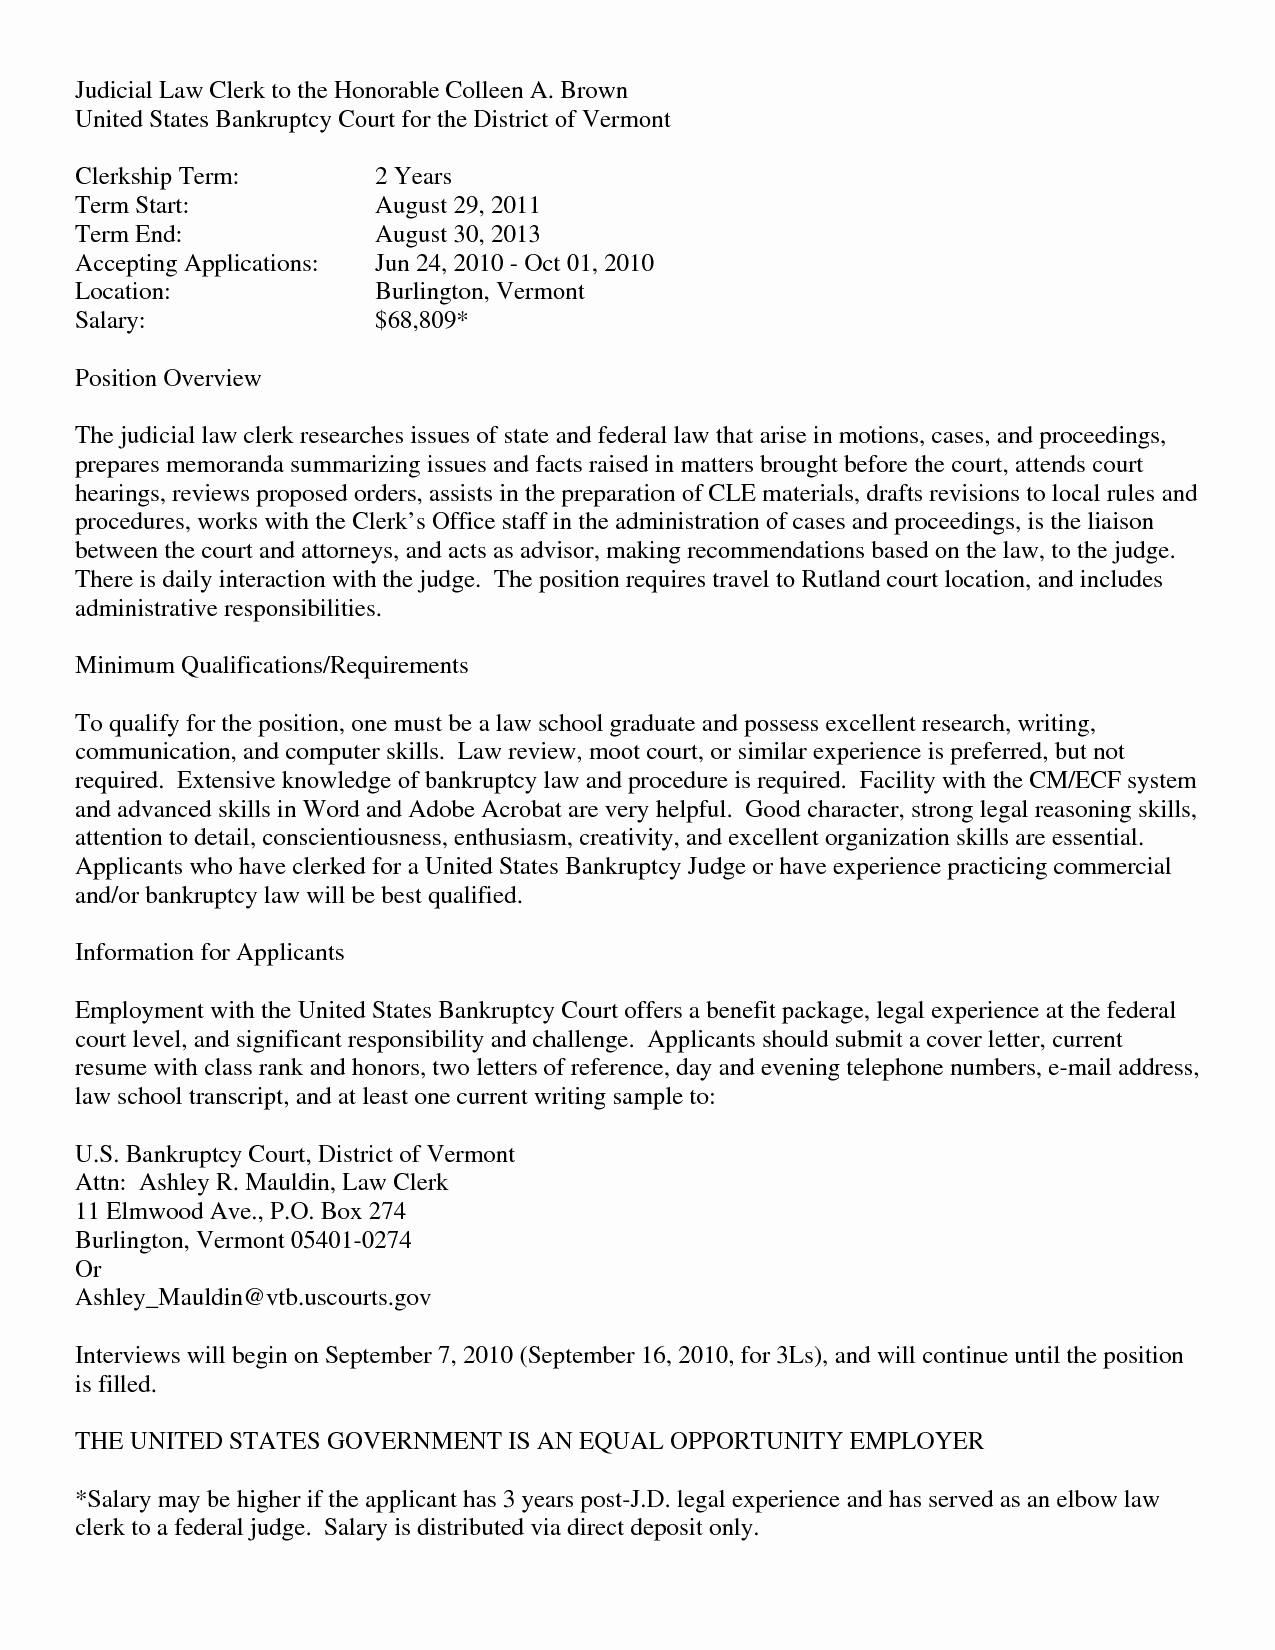 Reference Letter for A Job Beautiful Re Mendation Letter Sample for Job Applicationreference